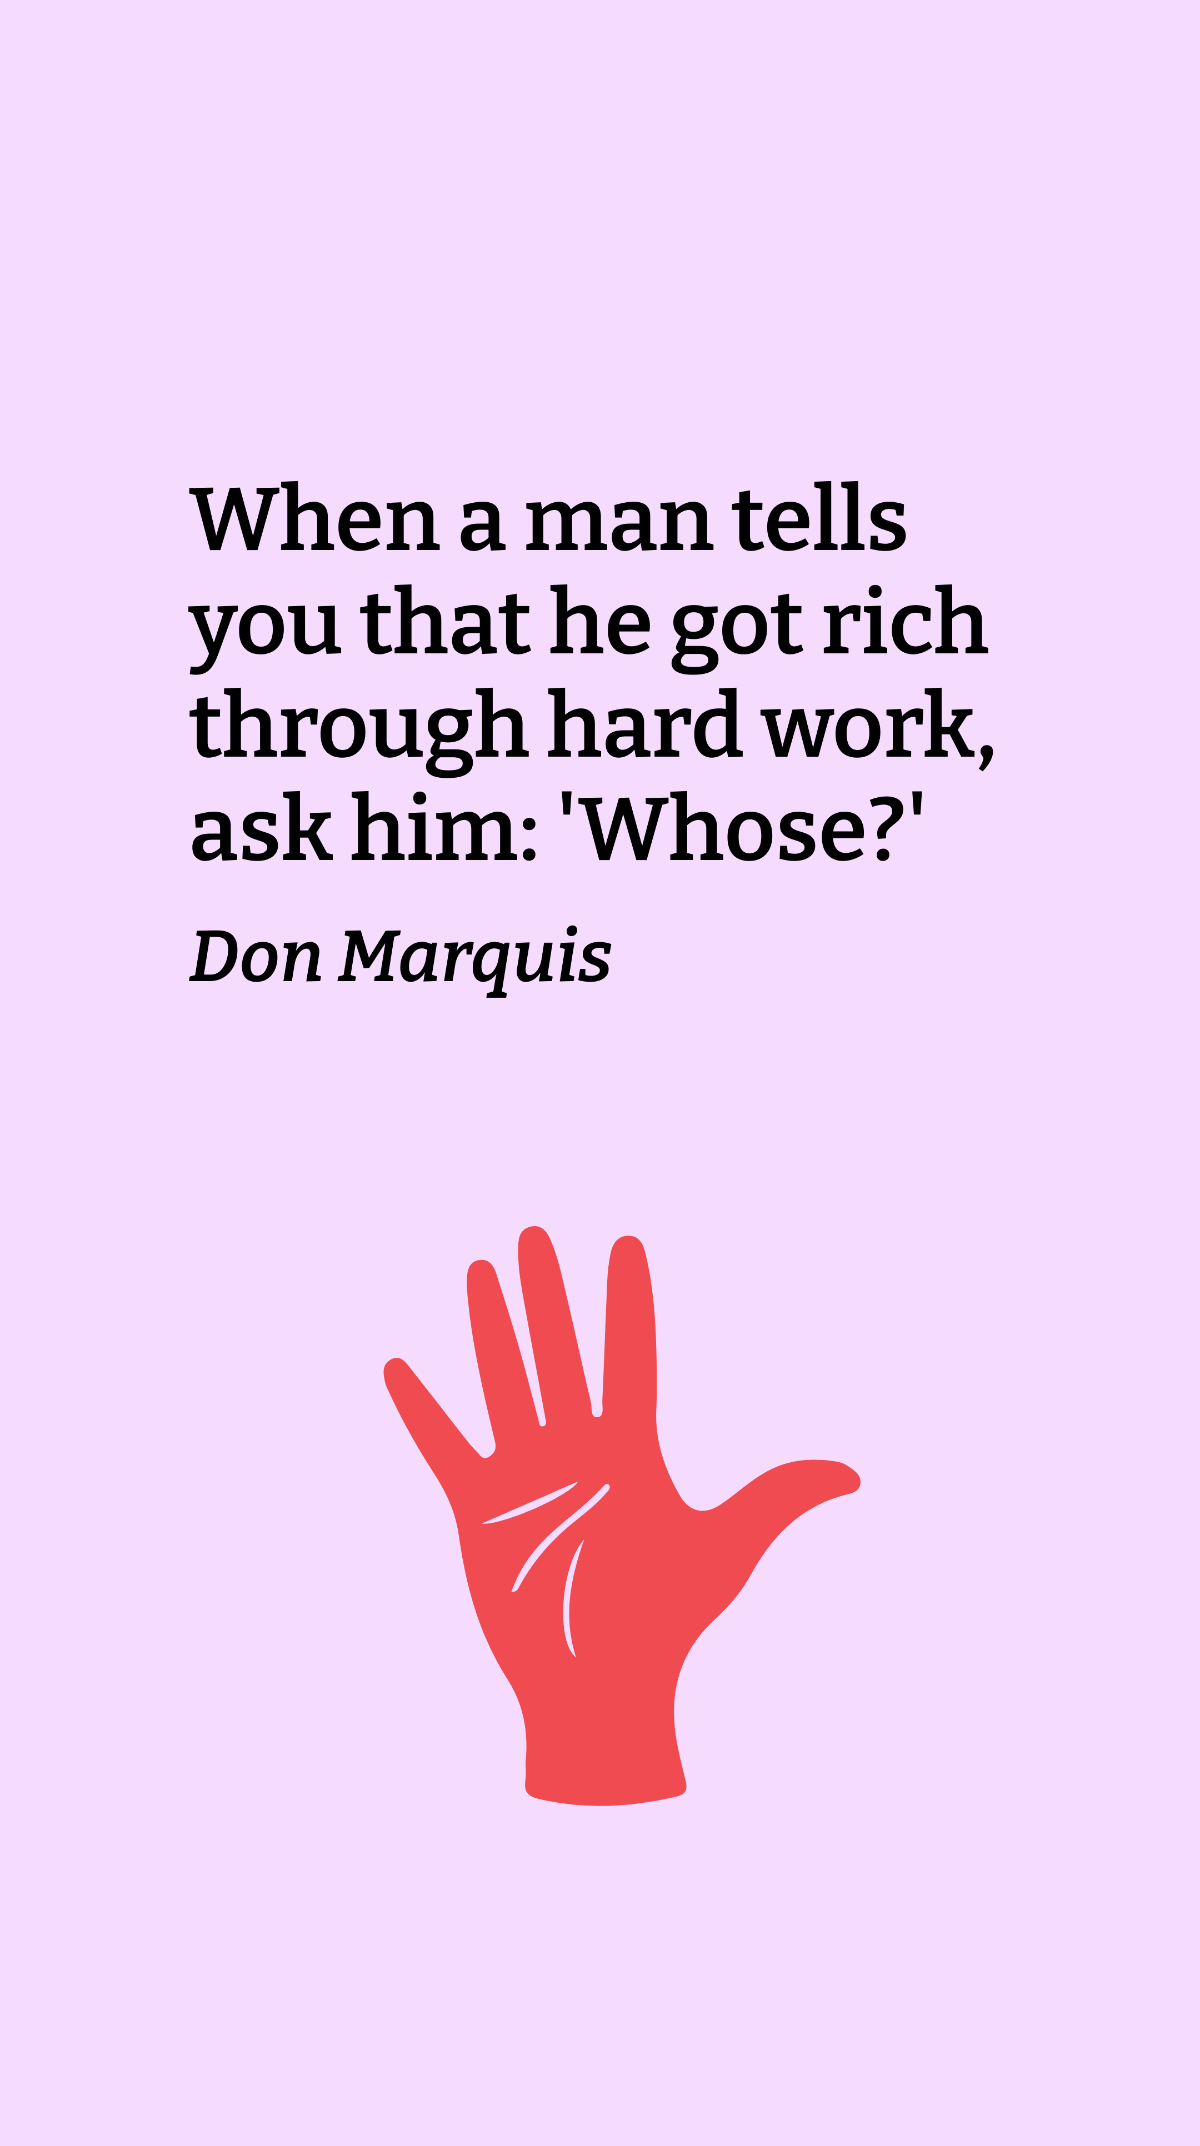 Don Marquis - When a man tells you that he got rich through hard work, ask him: 'Whose?' Template